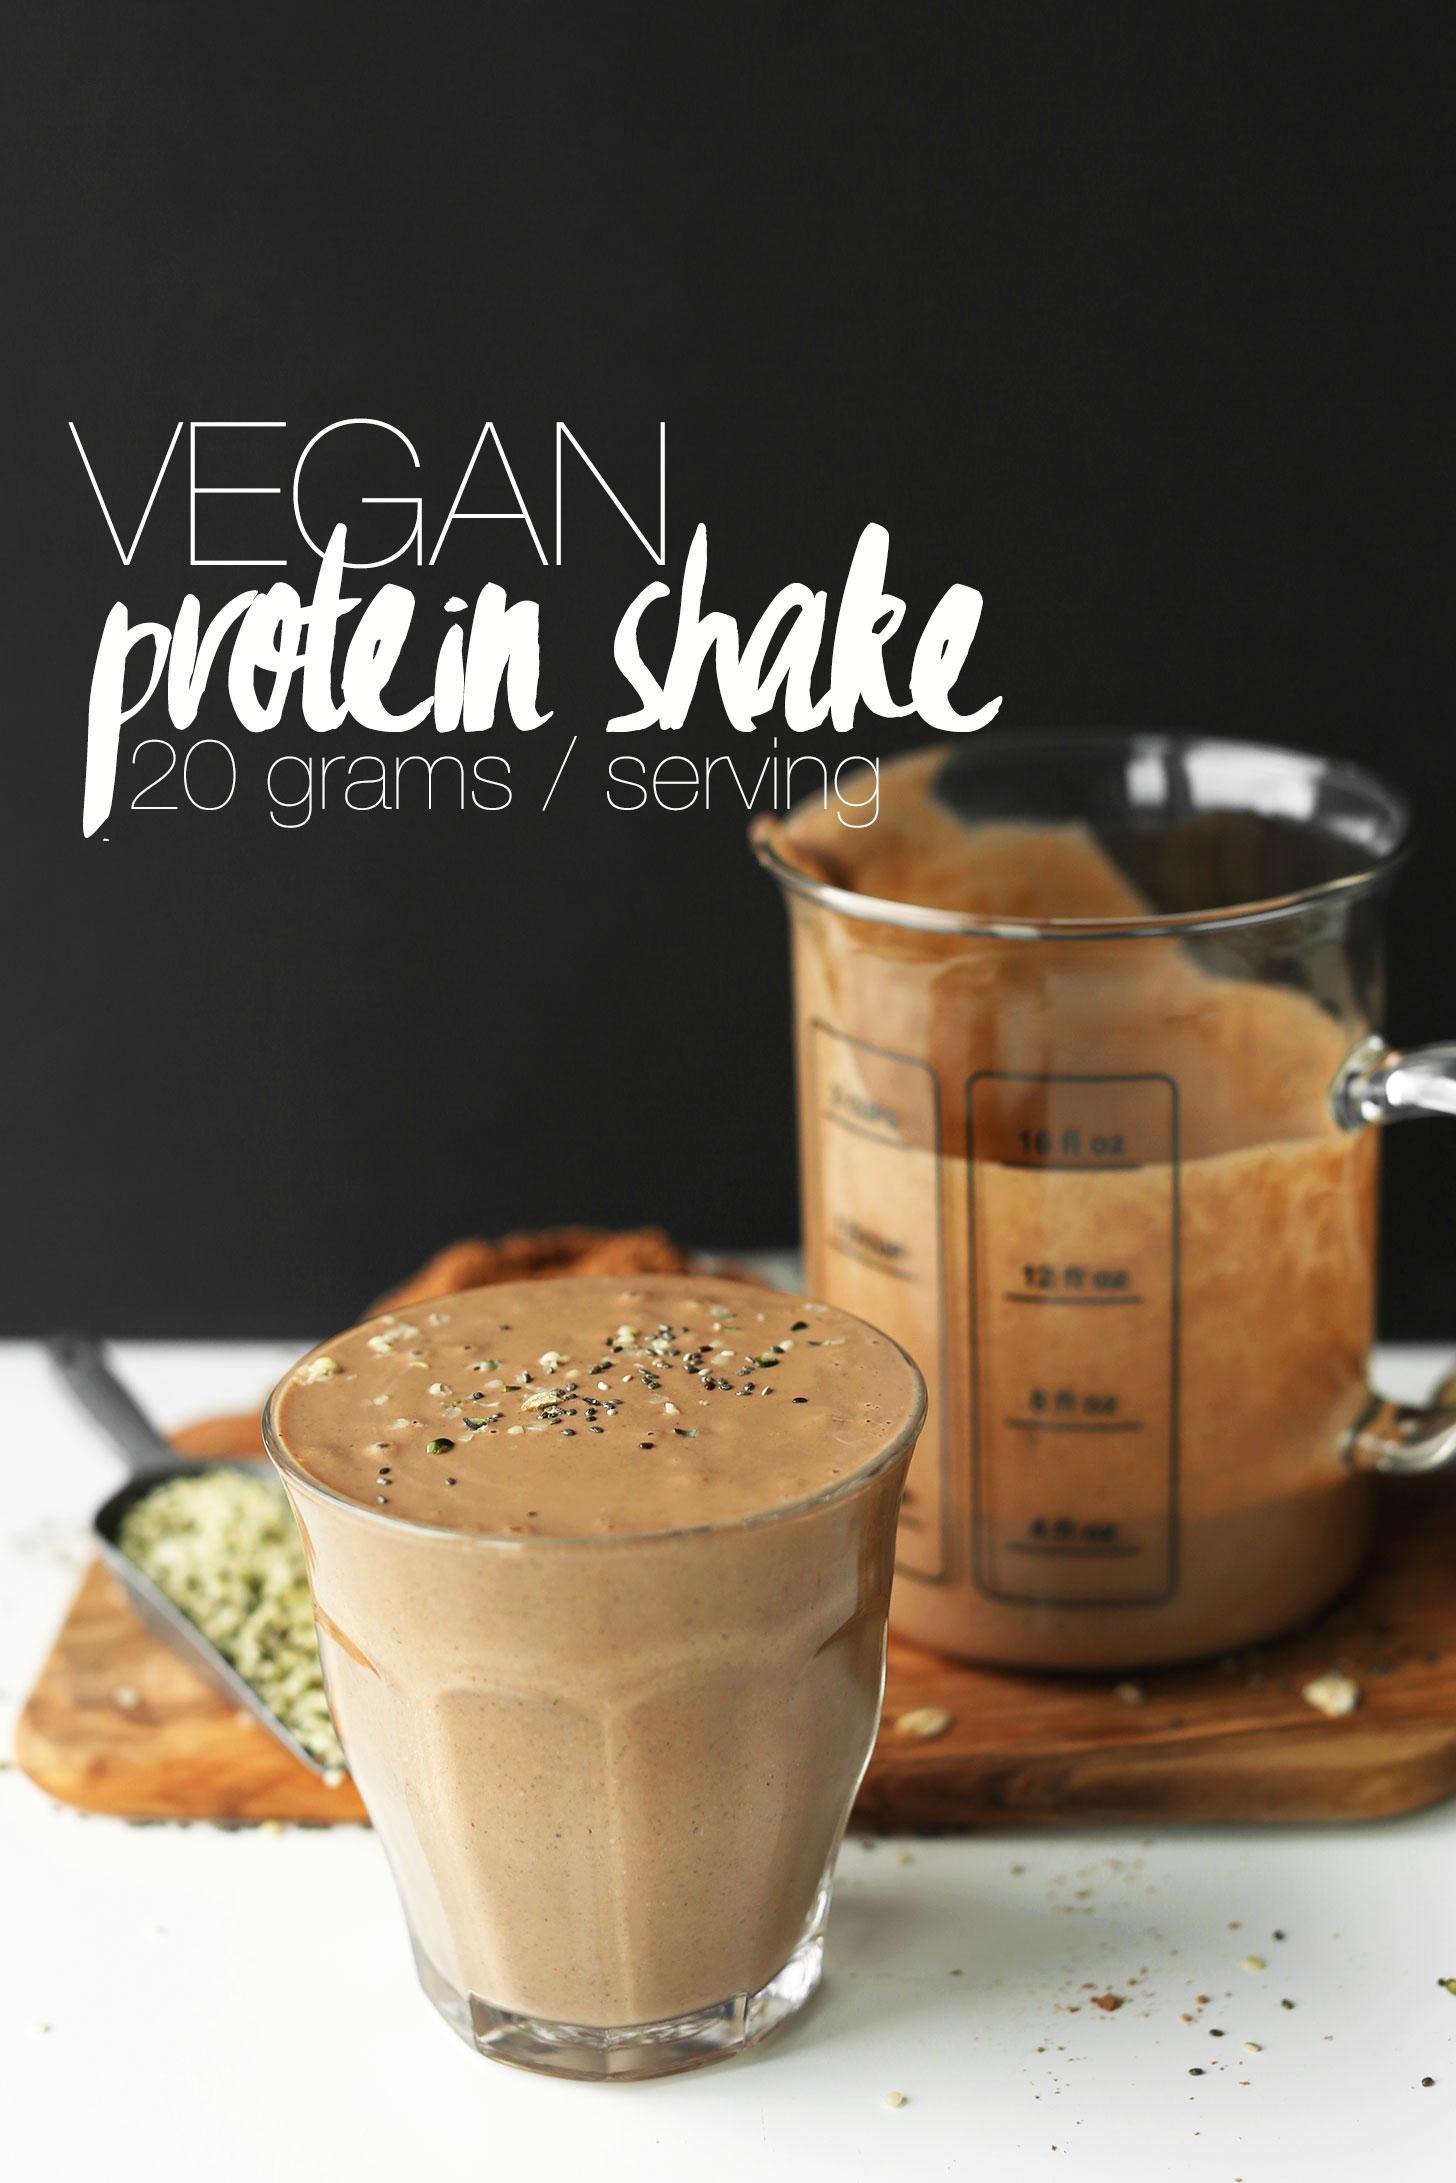 Measuring jar and glass filled with our Vegan Protein Shake recipe